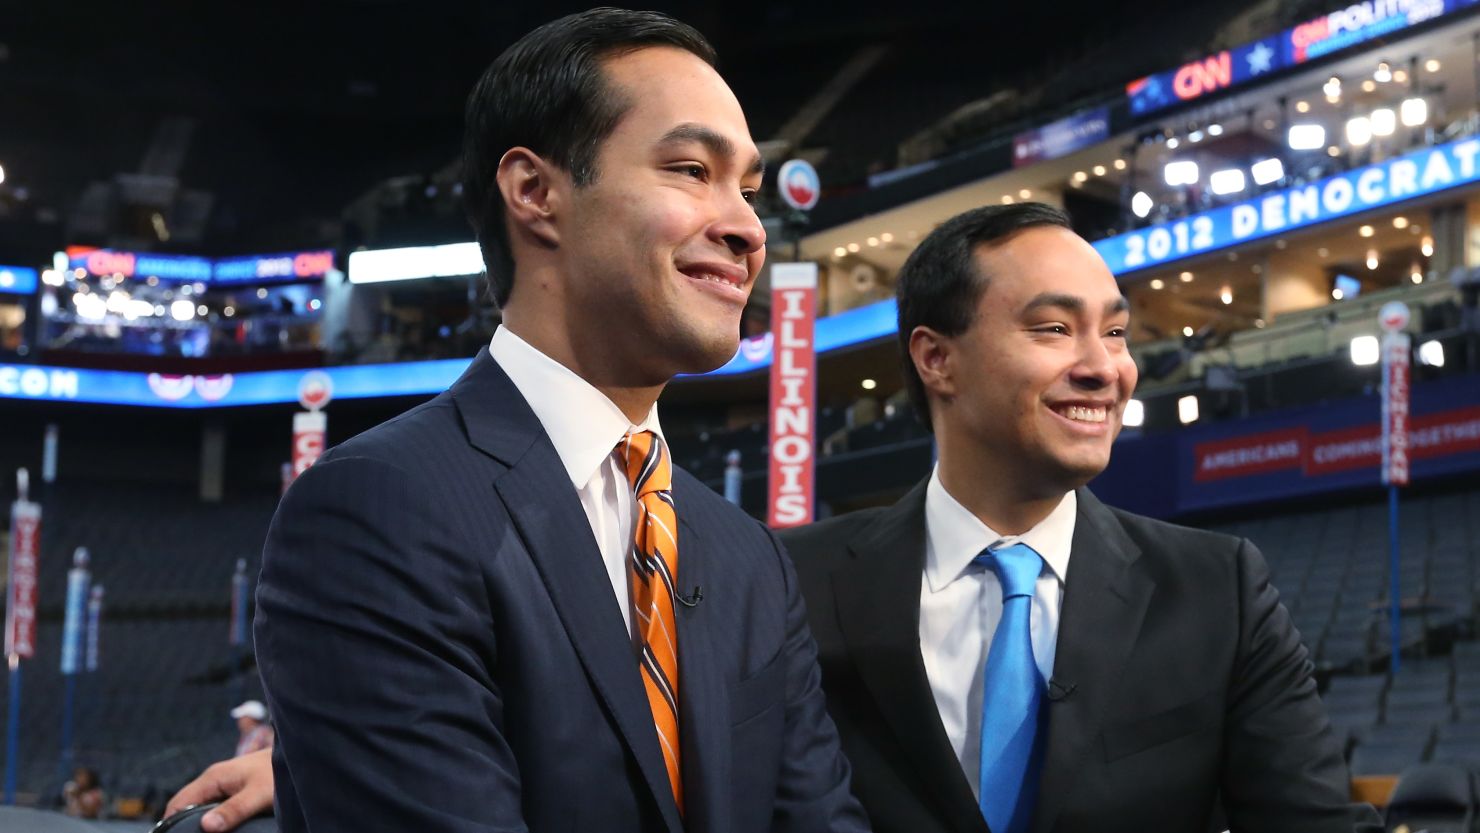 Julian Castro, left, with his brother Joaquin Castro, at the Democratic National Convention.